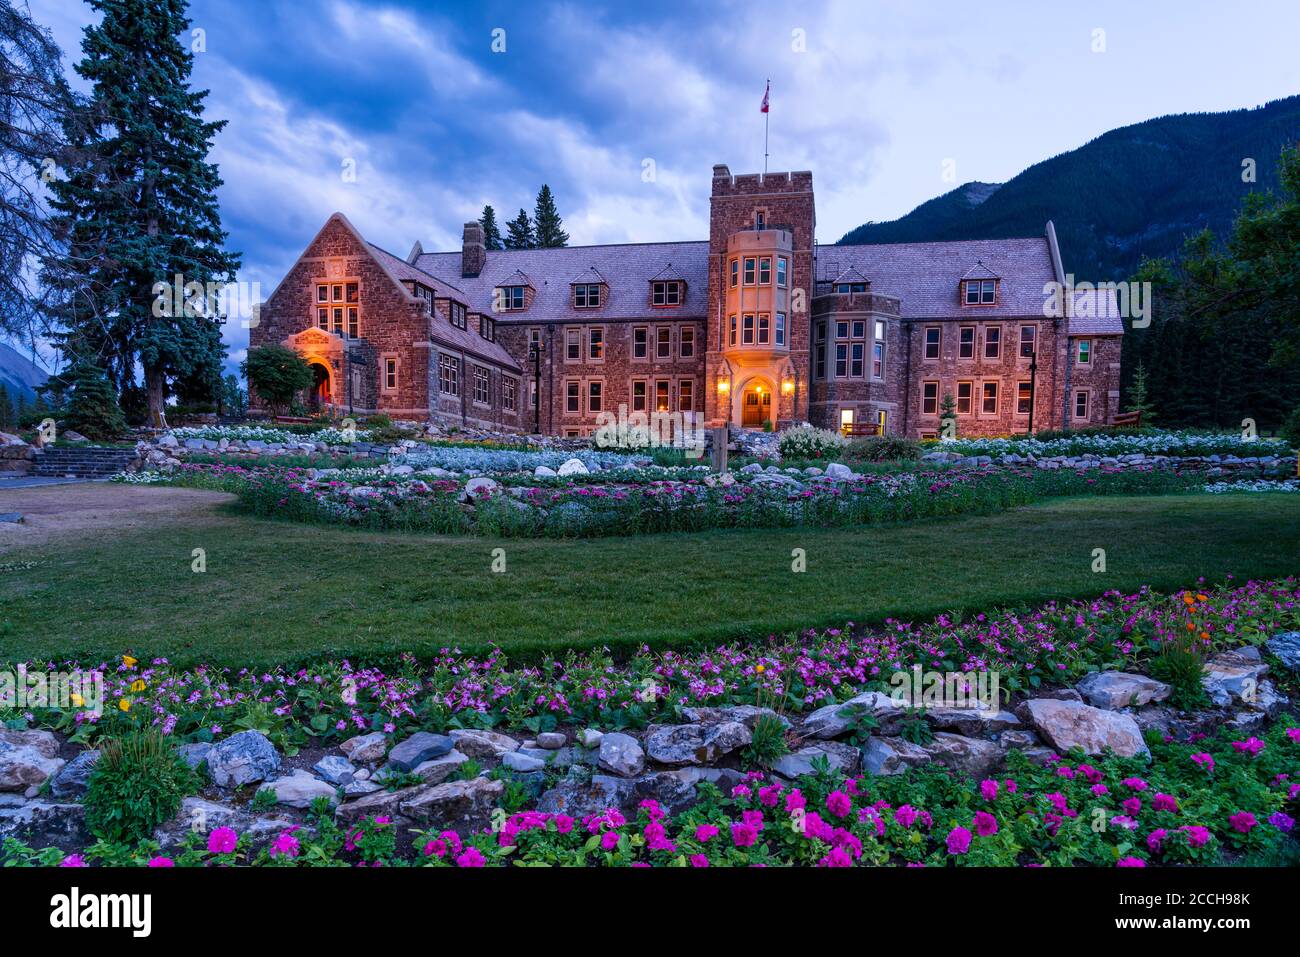 The Parks Canada administration building at night in the Banff townsite, Banff, Alberta, Canada. Stock Photo